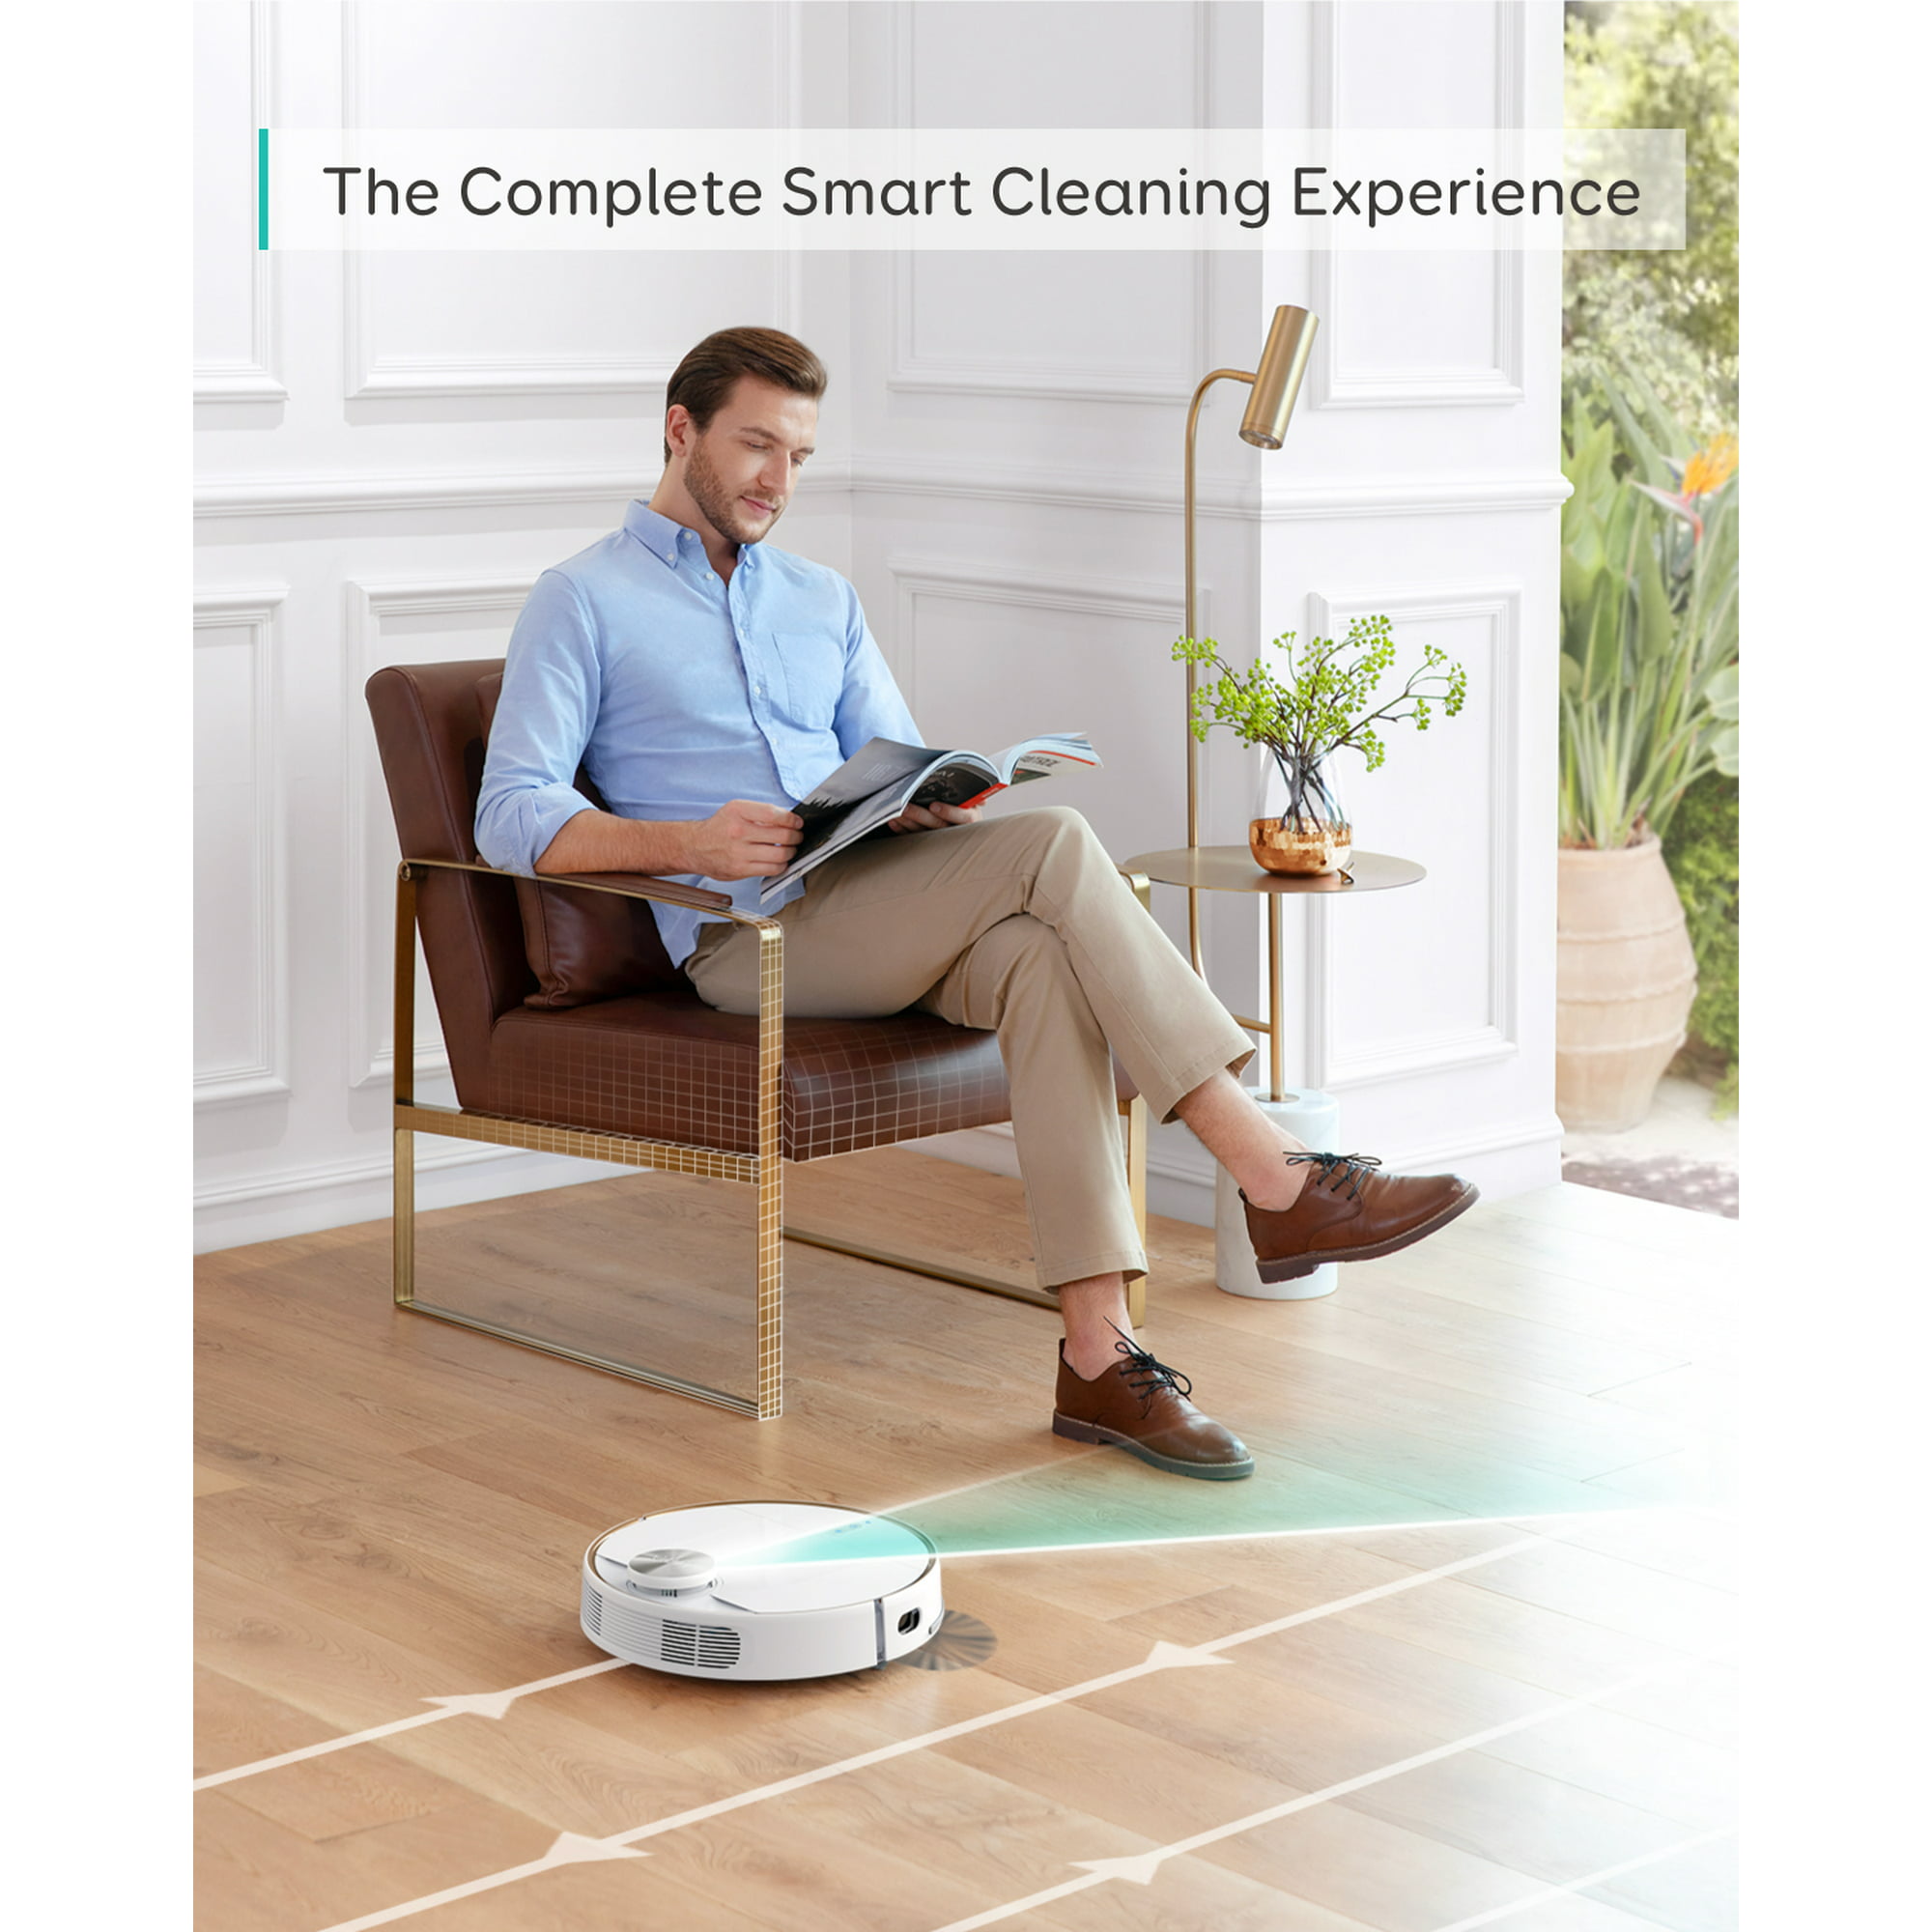 Anker eufy L70 Hybrid Robot 2-in-1 Vacuum and Mop